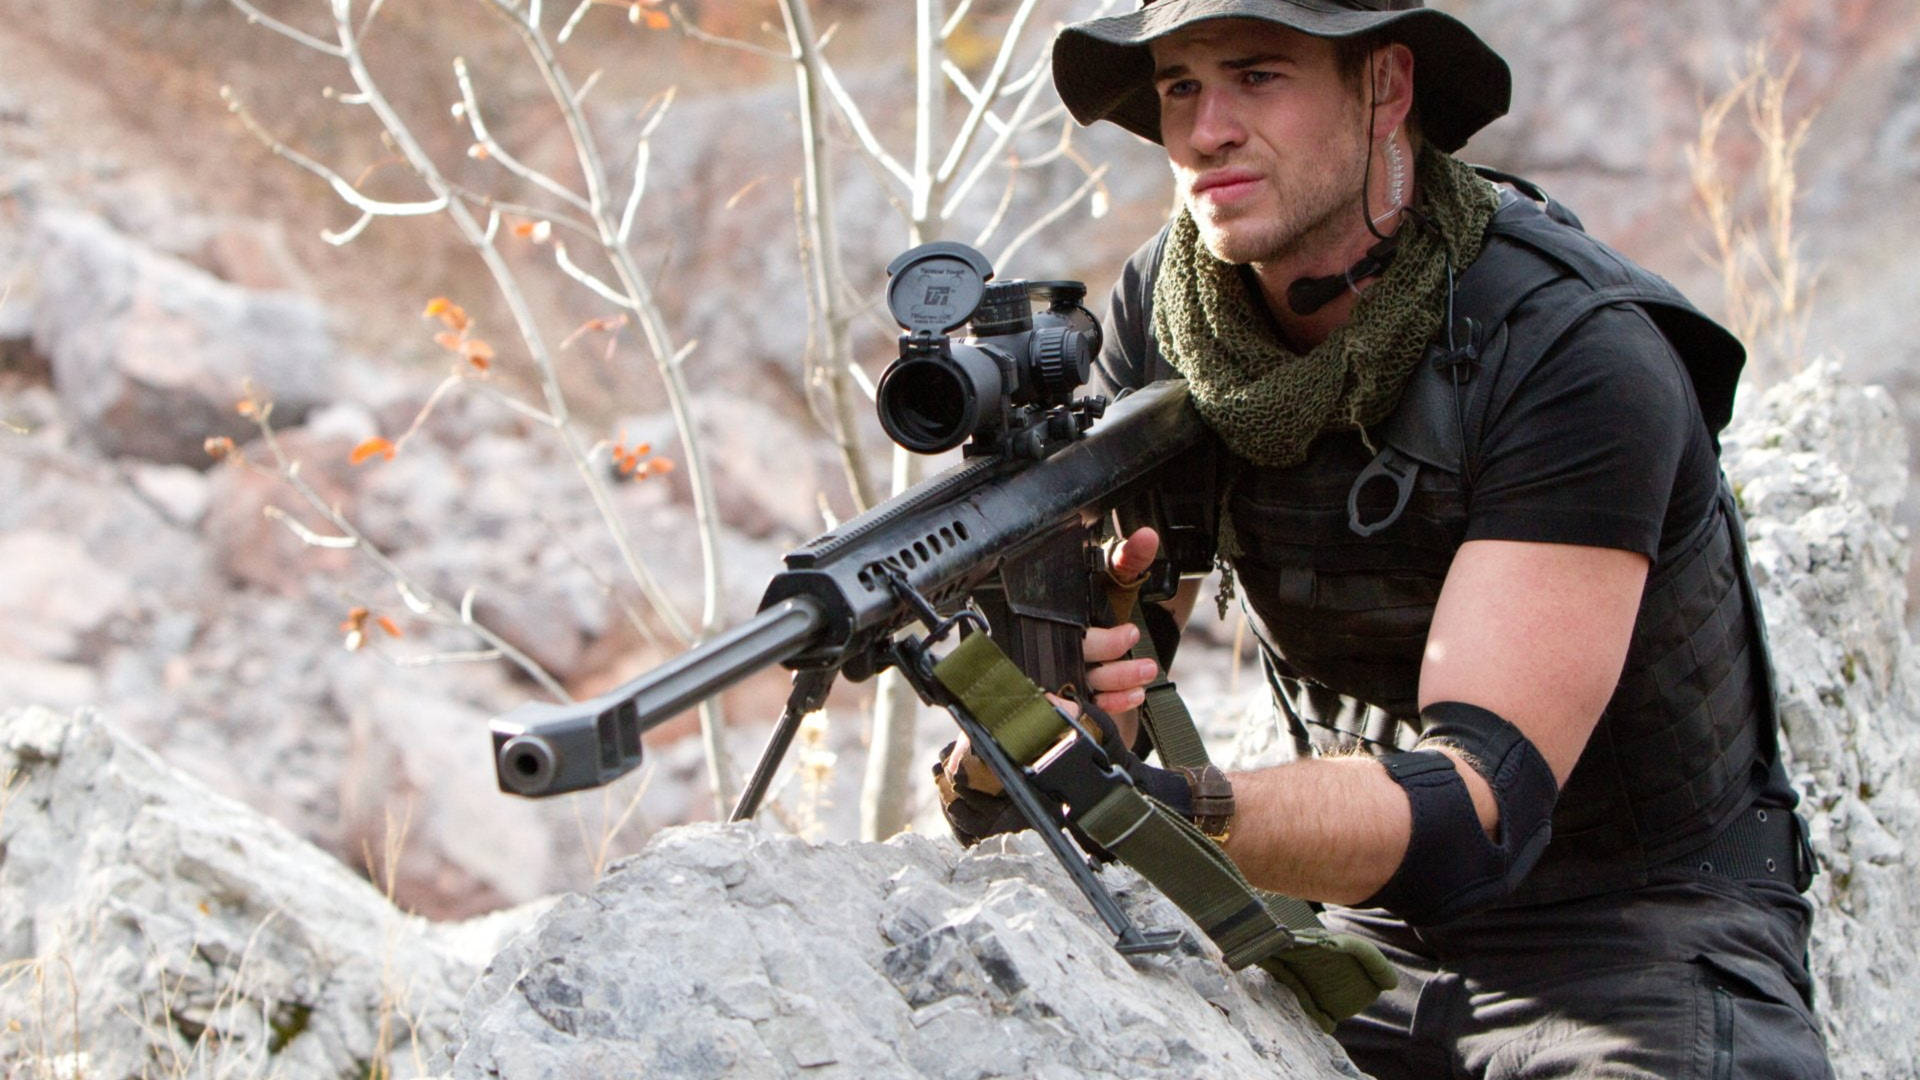 Liam Hemsworth In The Expendables Background